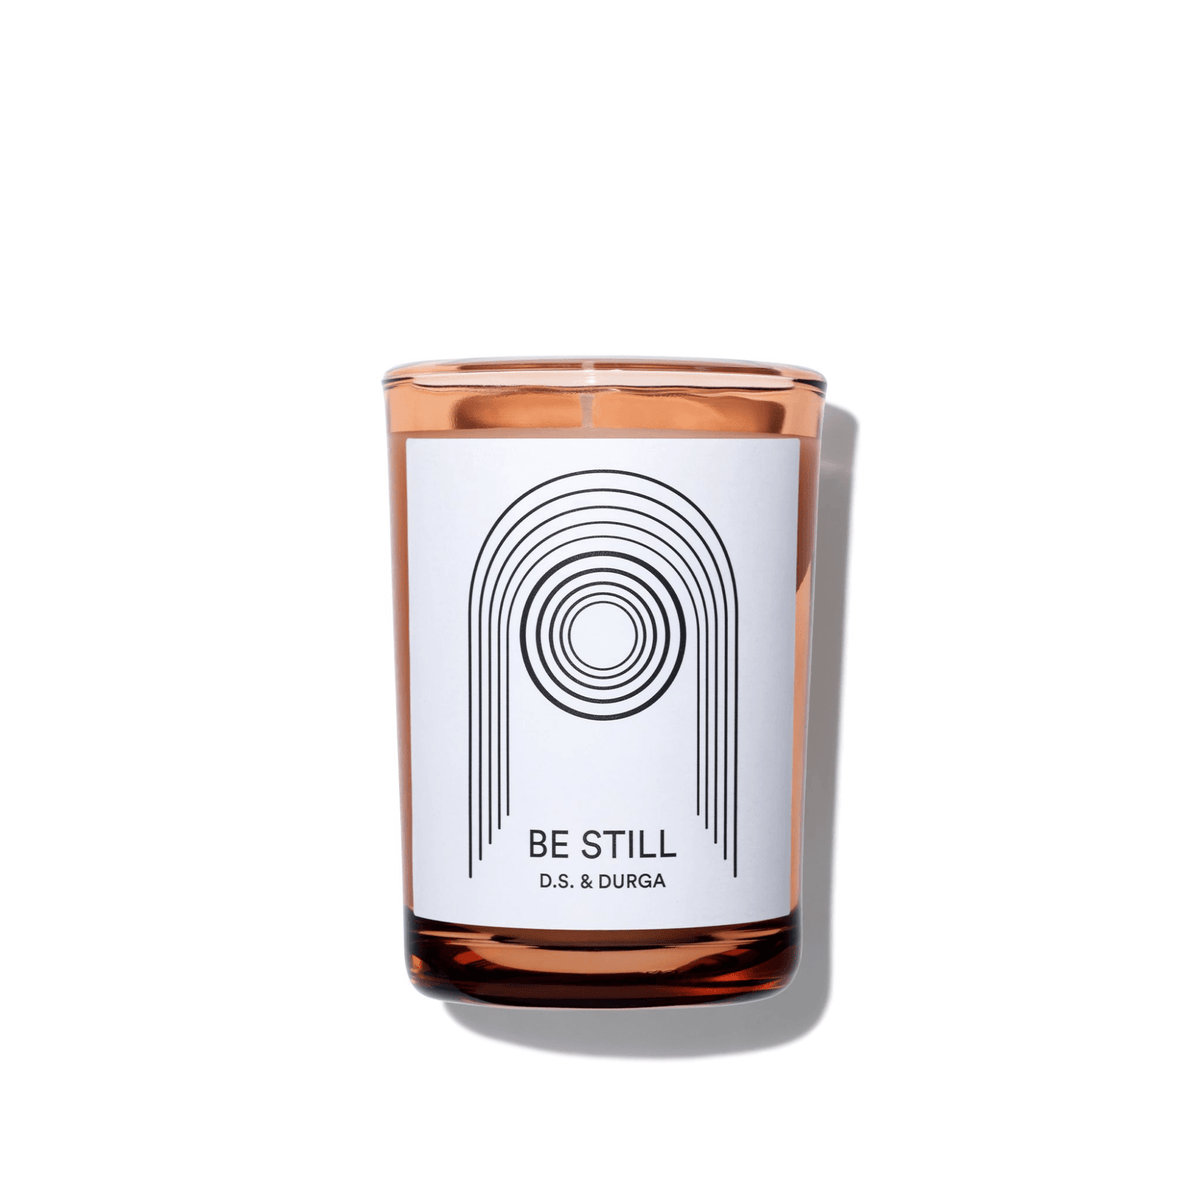 Primary Image of Be Still Candle